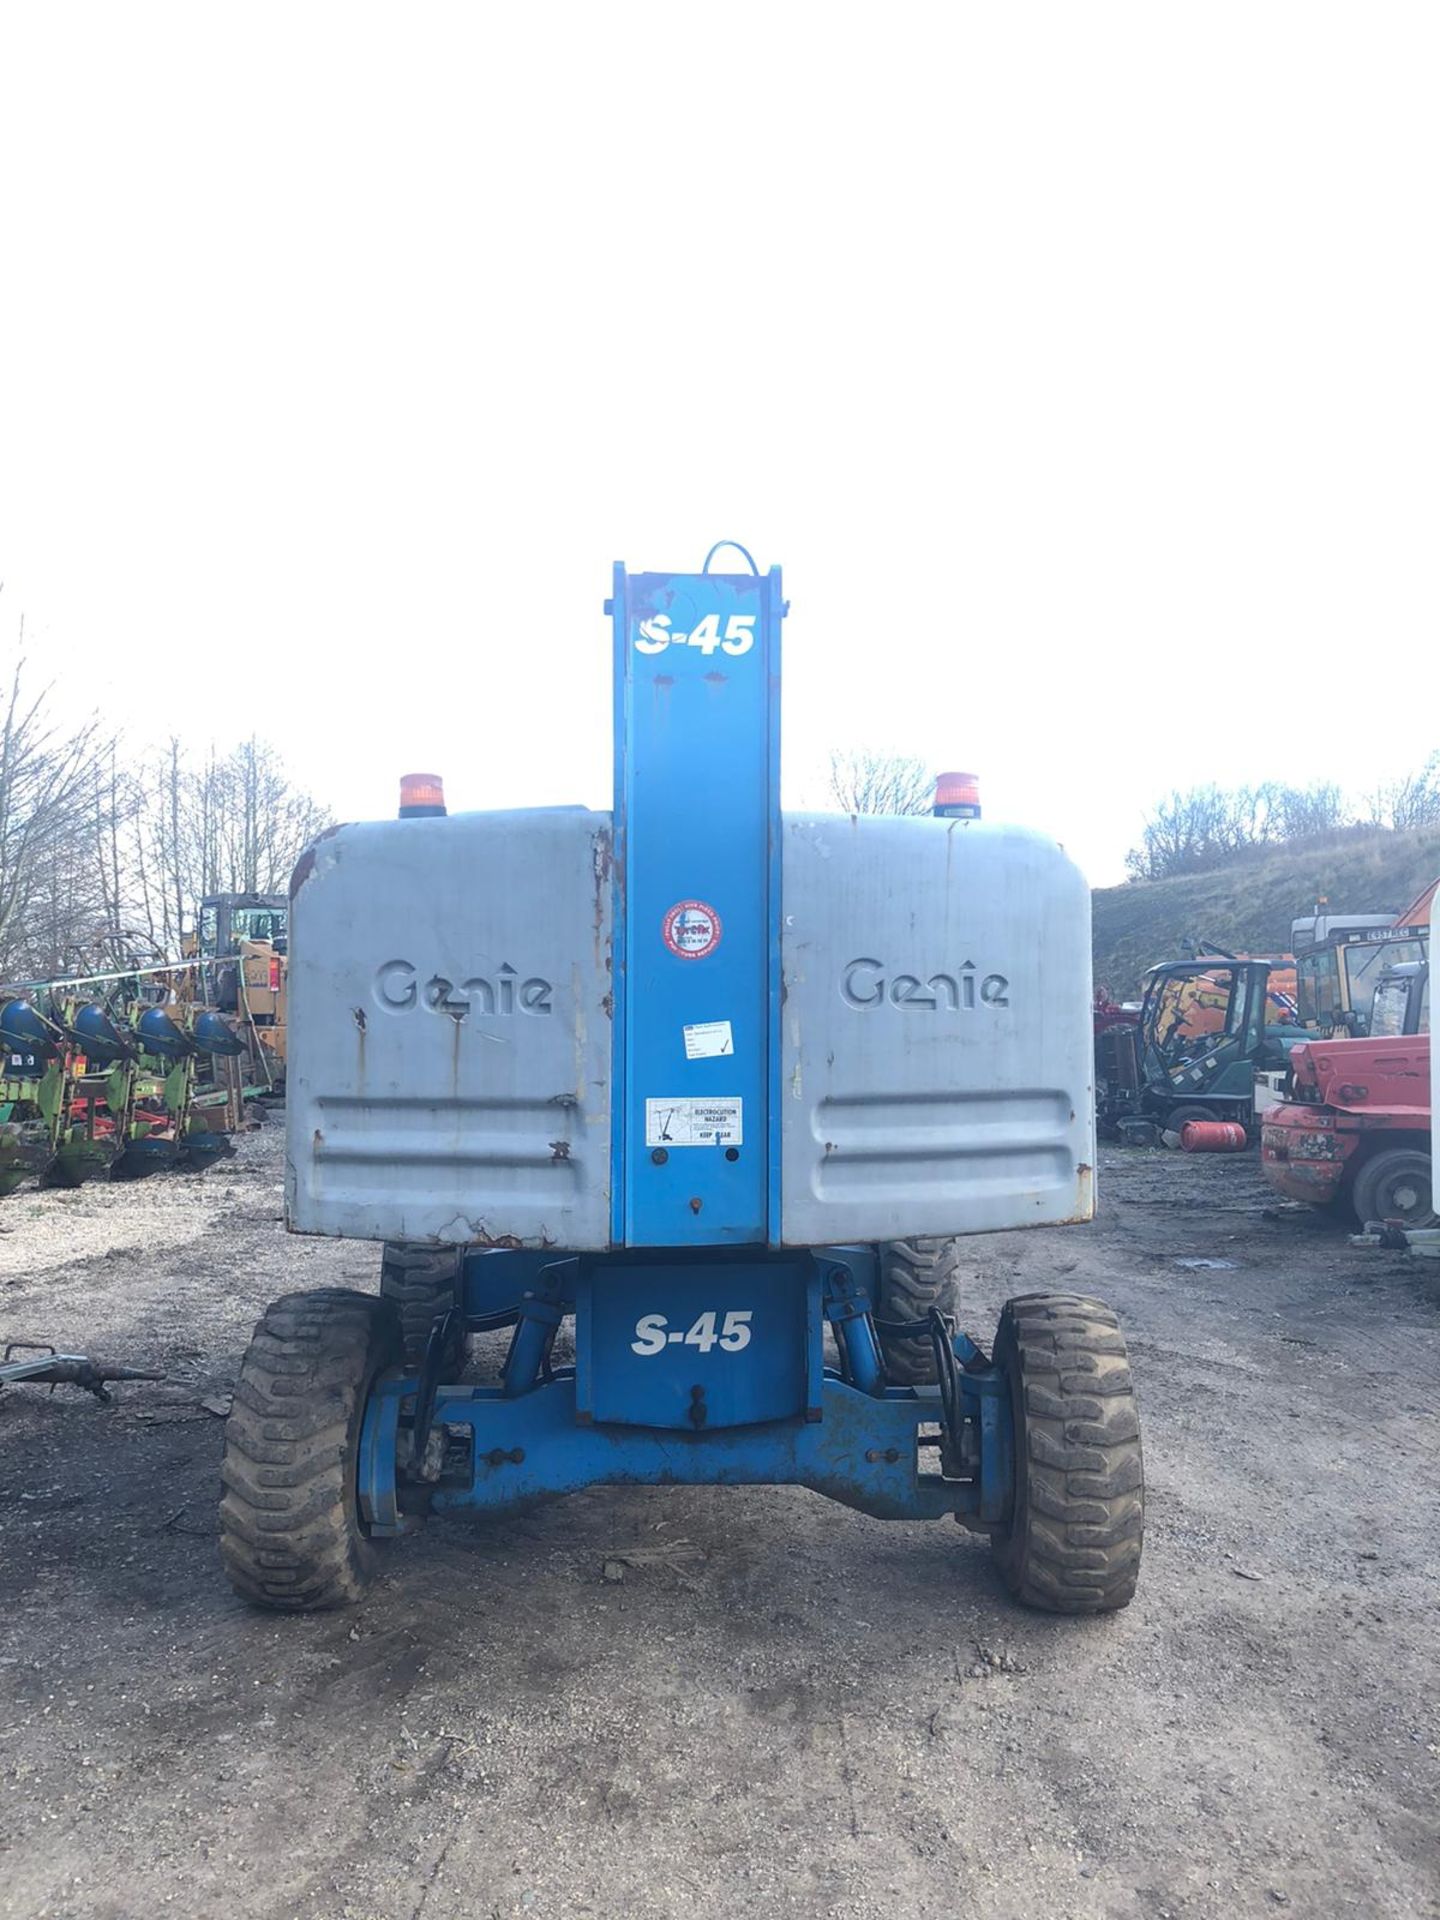 GENIE S-45 BOOM LIFT, 4 WHEEL DRIVE, RUNS, WORKS AND LIFTS *PLUS VAT* - Image 2 of 6